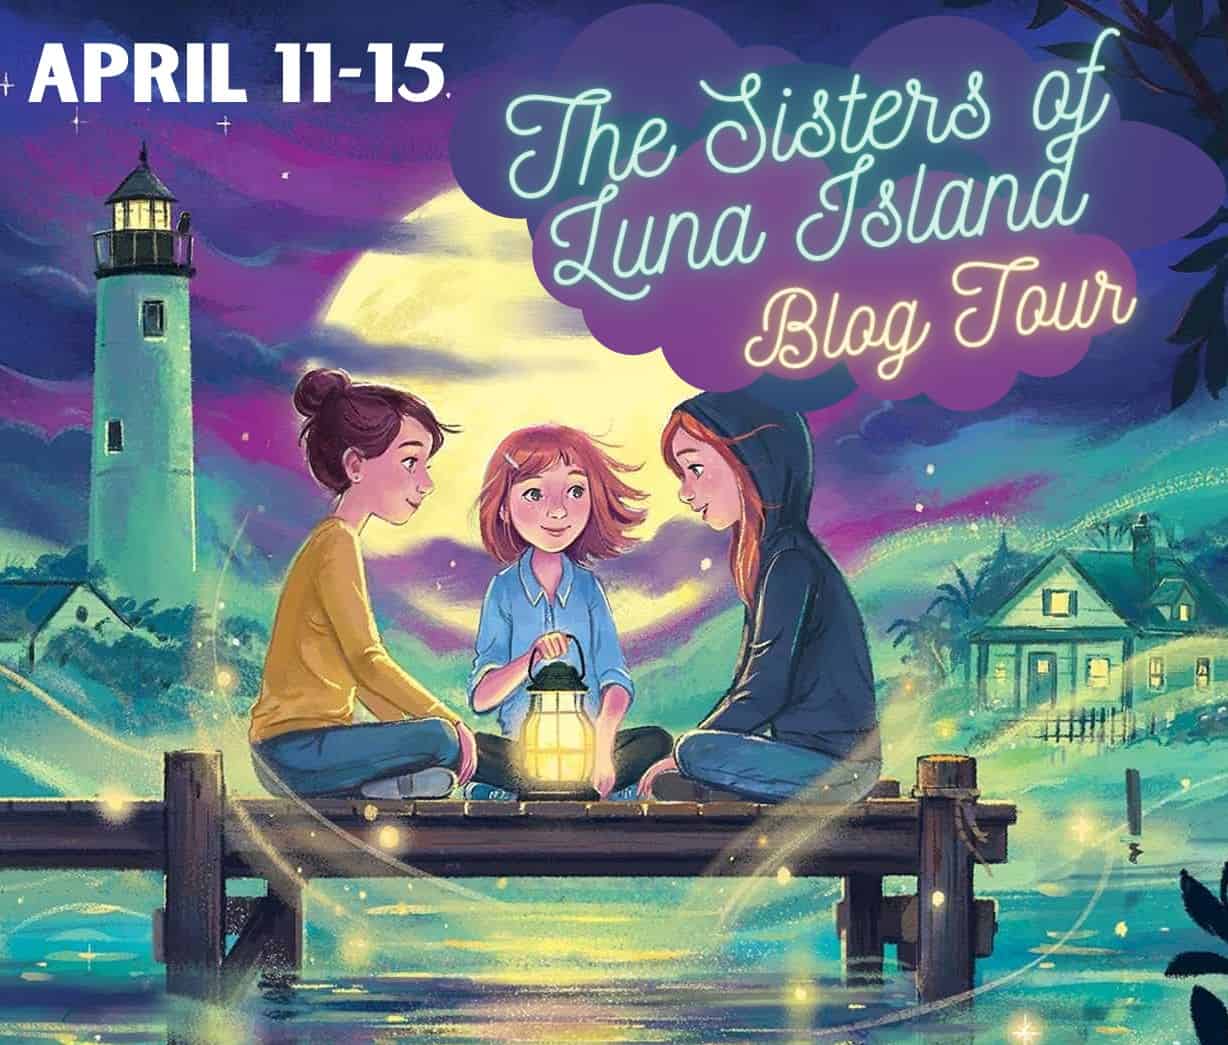 Stop and Smell the Aromagic (The Sisters of Luna Island Blog Tour)